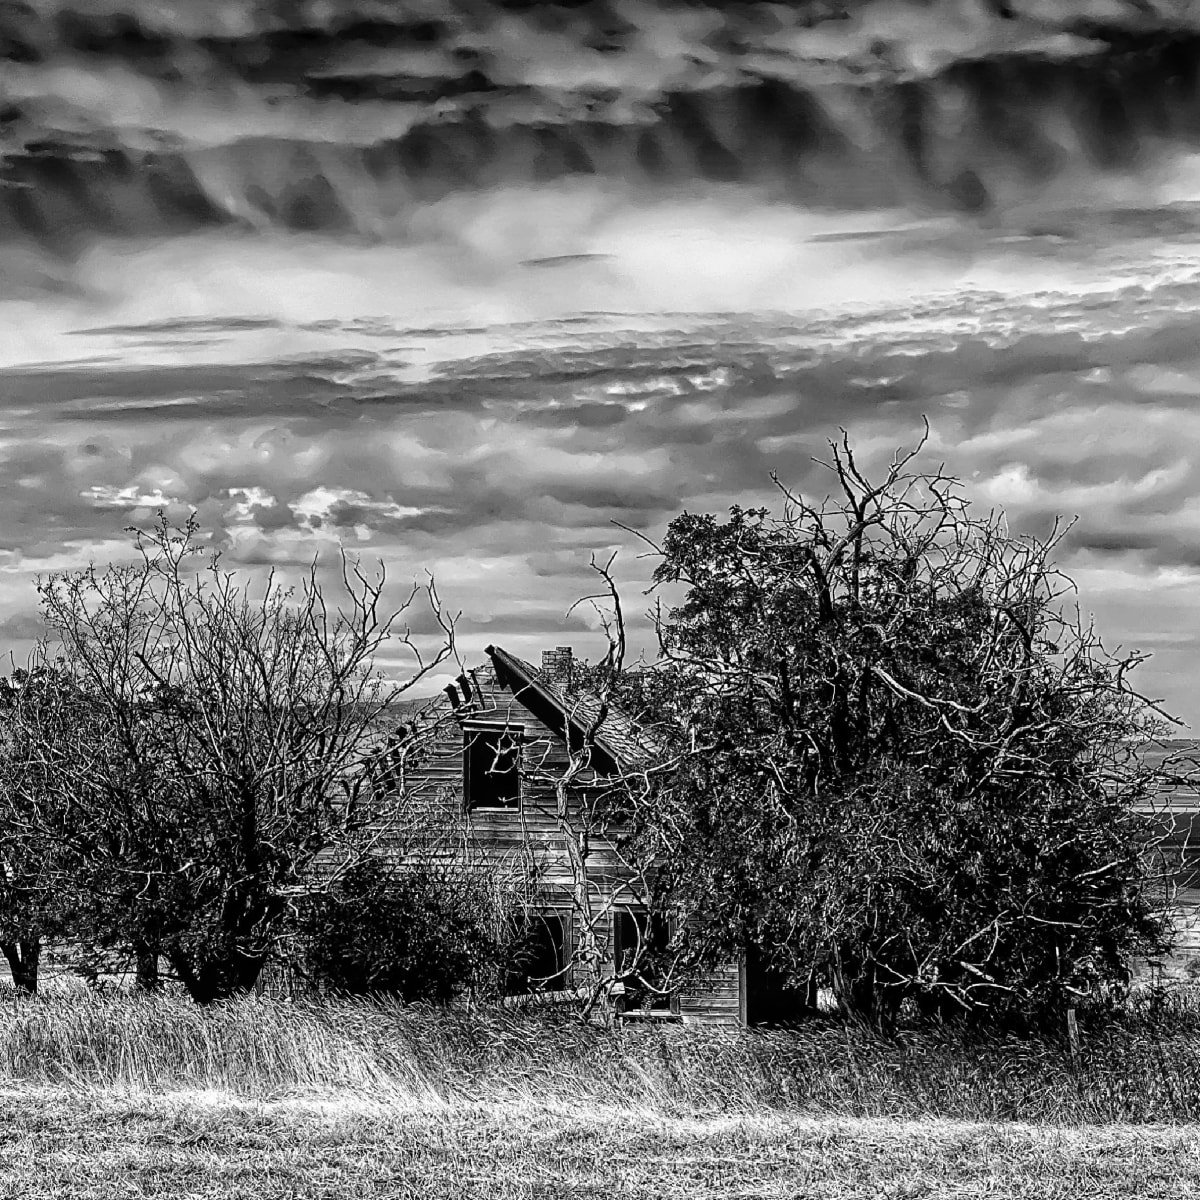 Once Upon a Time in the Old West  Image: Once Upon a Time in the Old West: Off Highway 97 near Goldendale, Washington